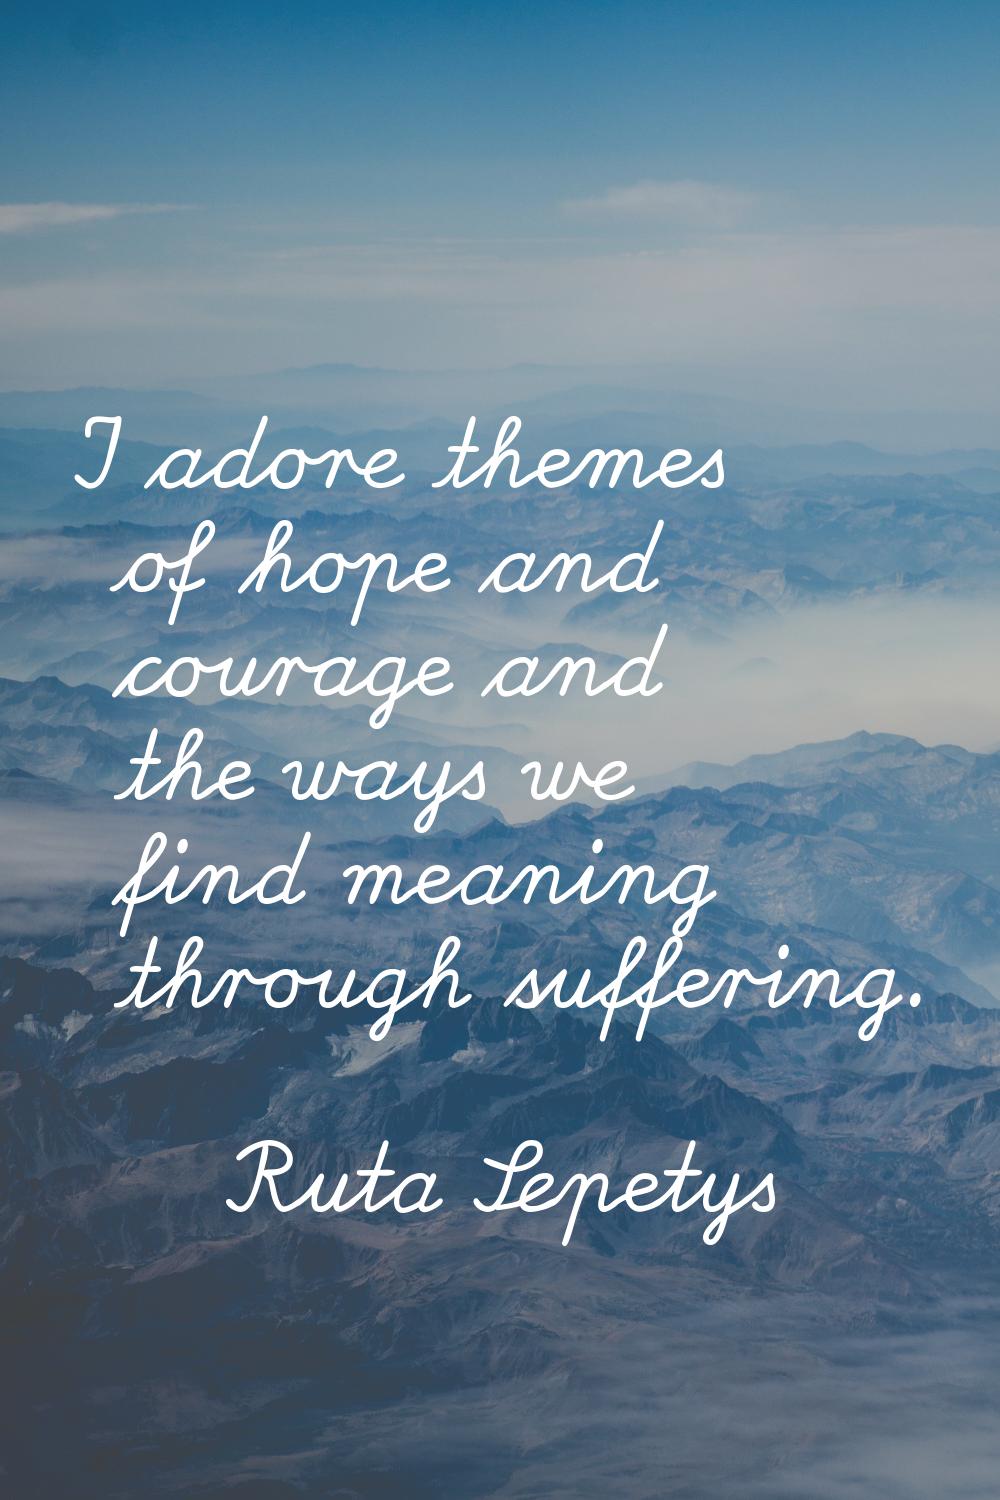 I adore themes of hope and courage and the ways we find meaning through suffering.